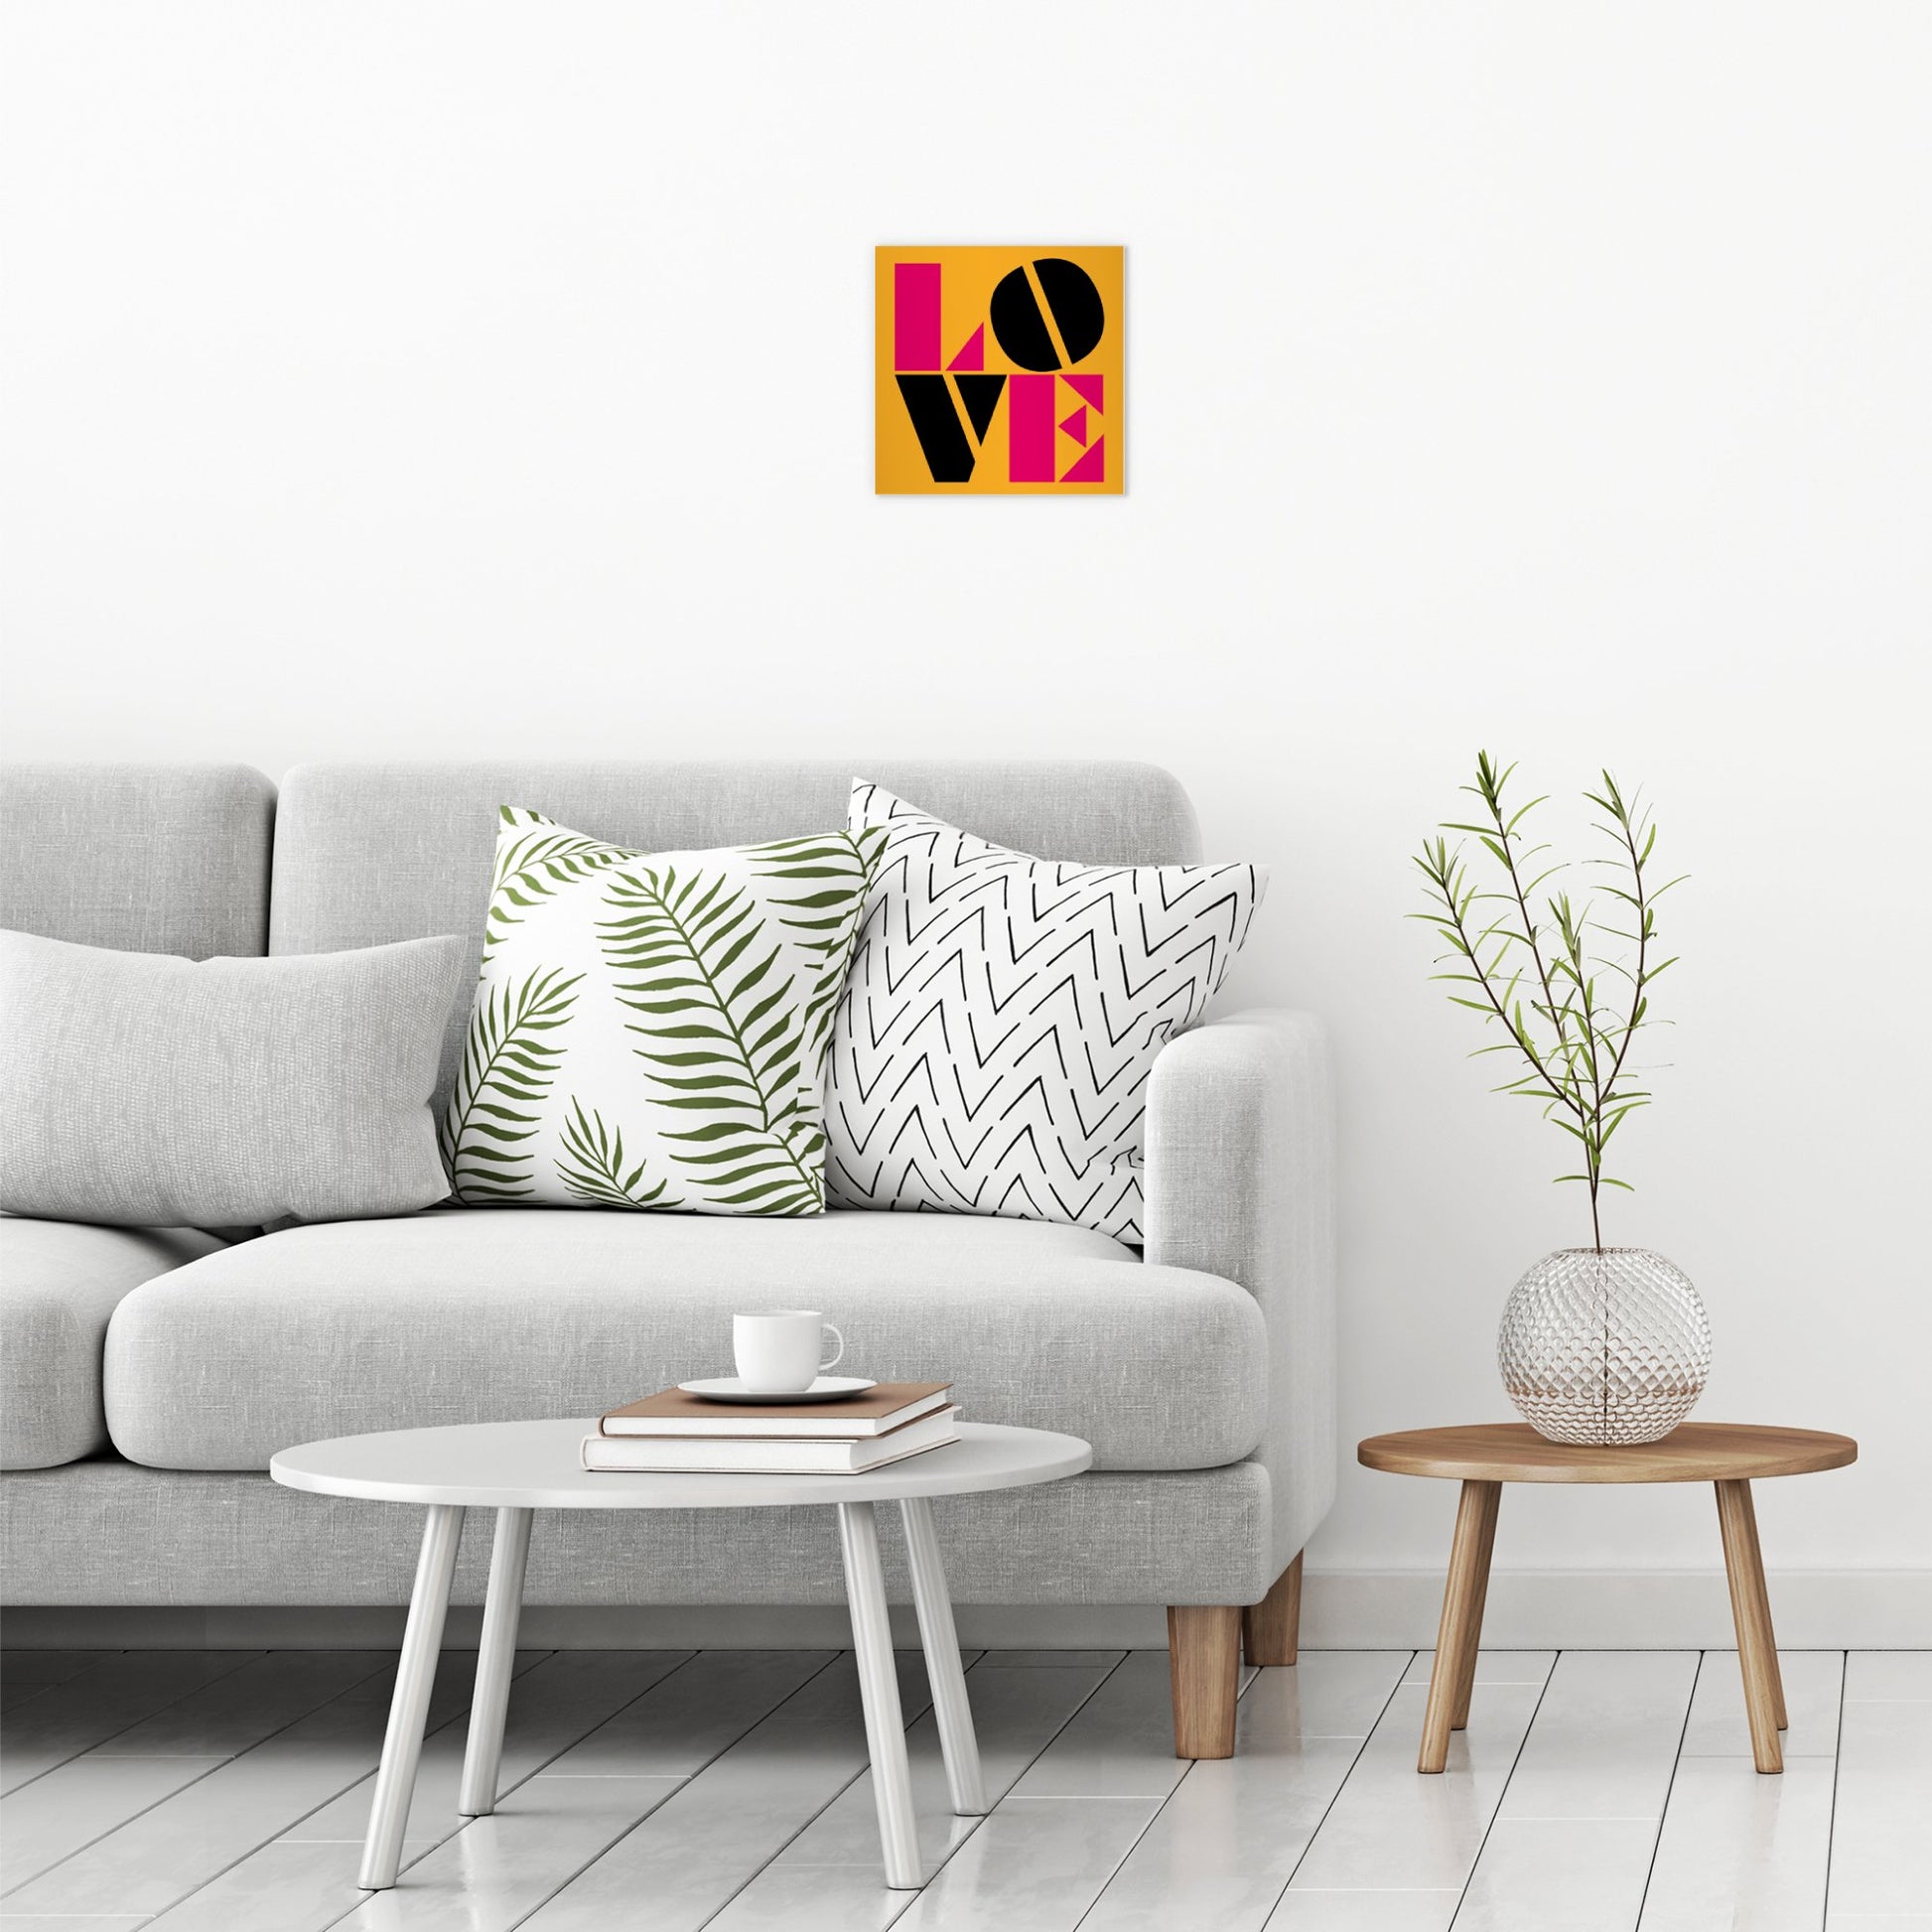 A contemporary modern room view showing a small size metal art poster display plate with printed design of a Typographic Love Design